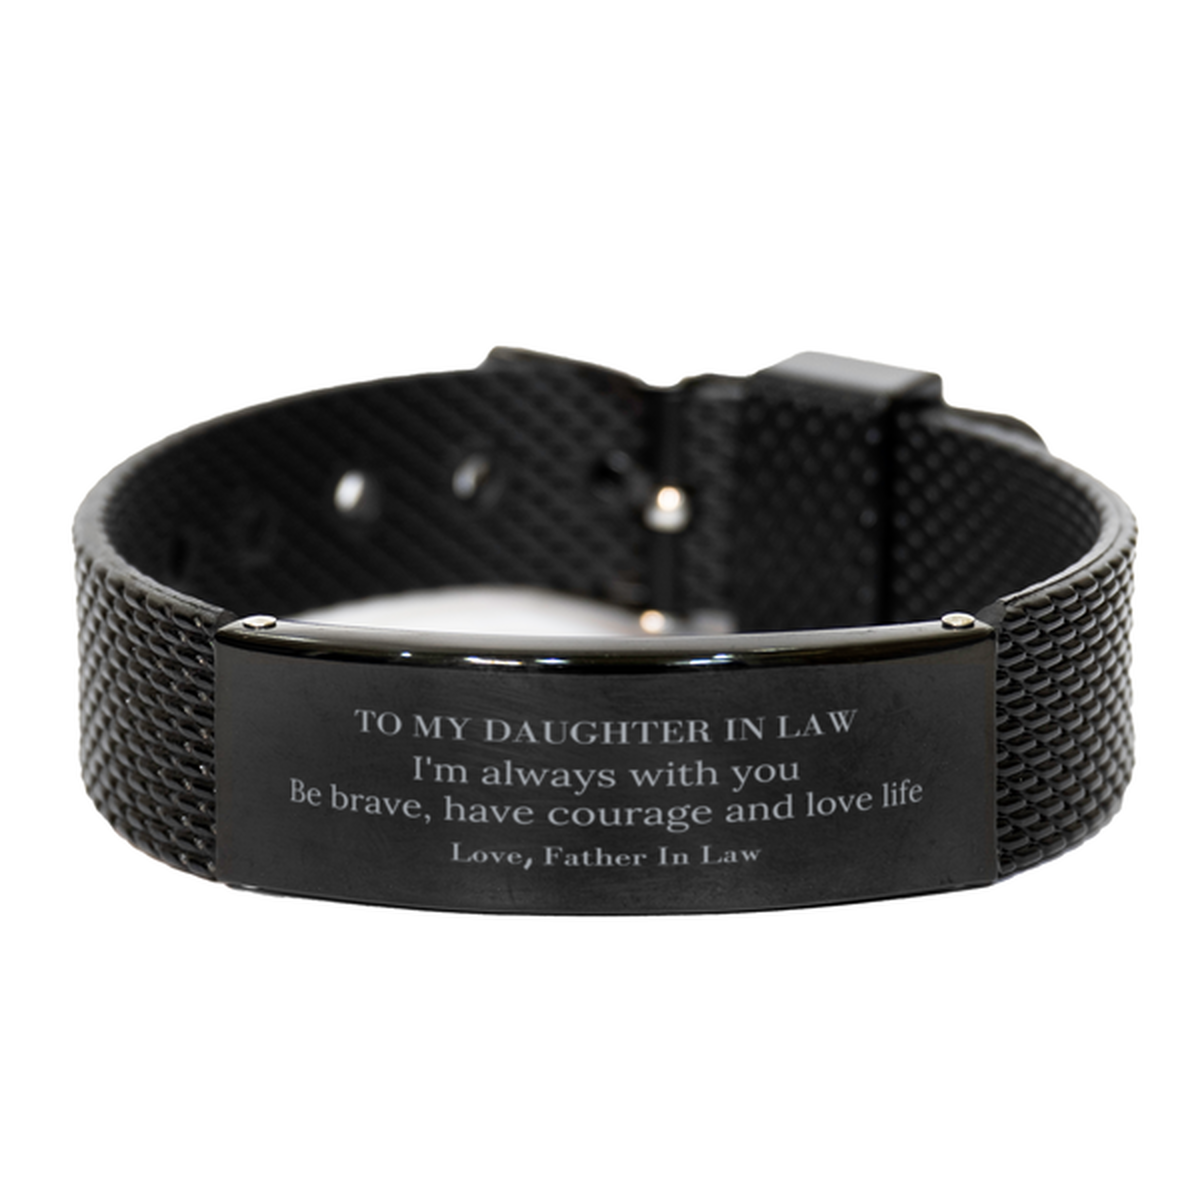 To My Daughter In Law Gifts from Father In Law, Unique Black Shark Mesh Bracelet Inspirational Christmas Birthday Graduation Gifts for Daughter In Law I'm always with you. Be brave, have courage and love life. Love, Father In Law